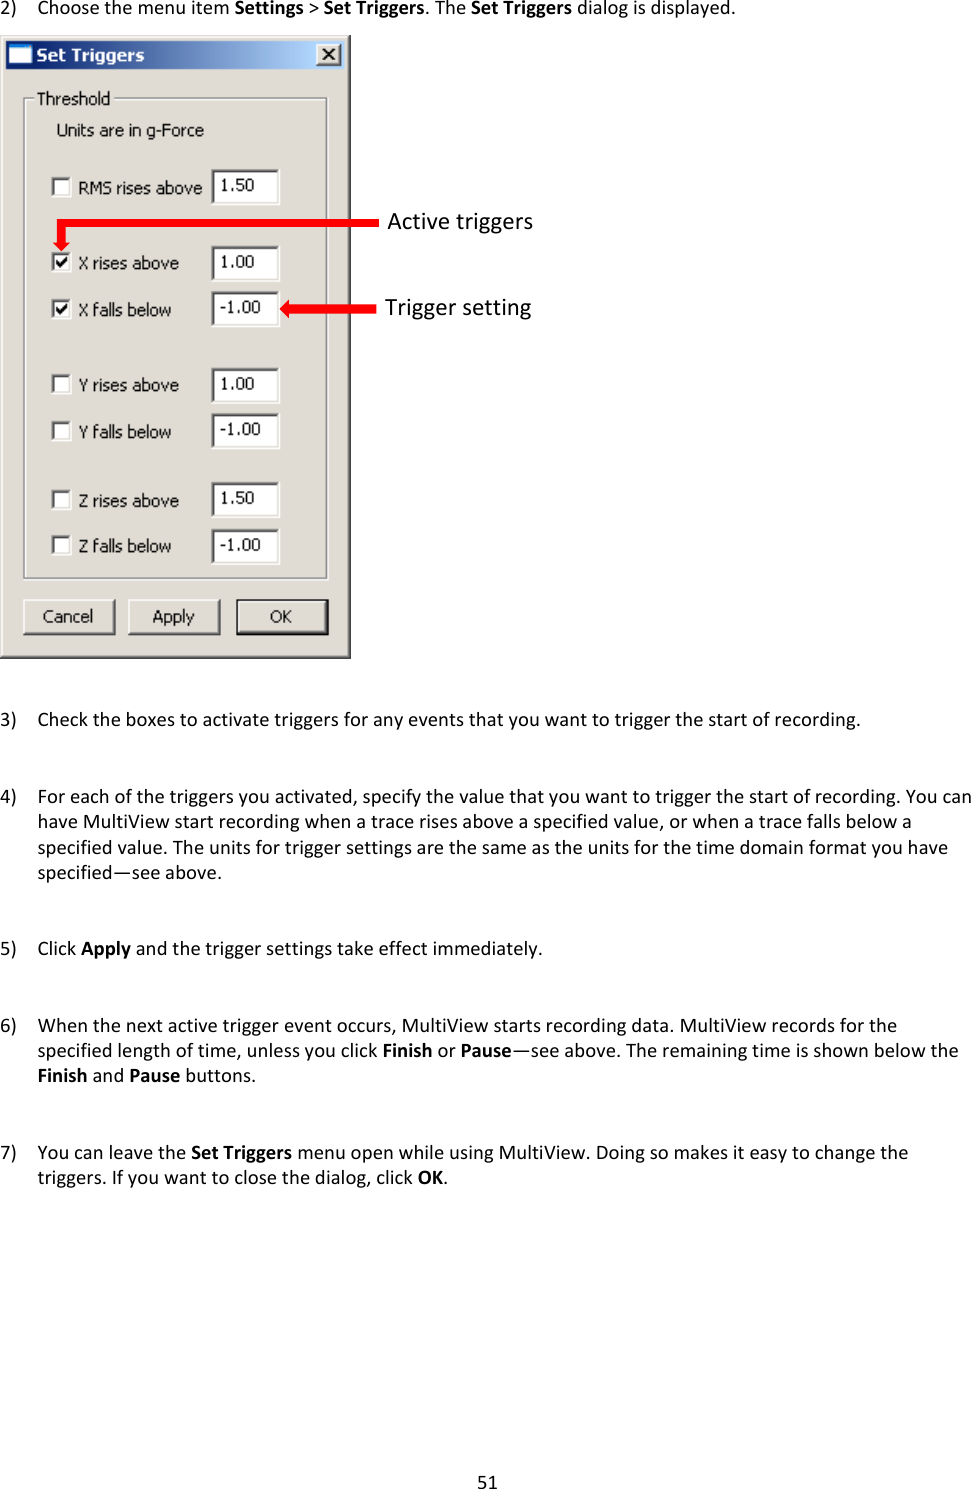   51 2) Choose the menu item Settings &gt; Set Triggers. The Set Triggers dialog is displayed.                            3) Check the boxes to activate triggers for any events that you want to trigger the start of recording.   4) For each of the triggers you activated, specify the value that you want to trigger the start of recording. You can have MultiView start recording when a trace rises above a specified value, or when a trace falls below a specified value. The units for trigger settings are the same as the units for the time domain format you have specified—see above.   5) Click Apply and the trigger settings take effect immediately.   6) When the next active trigger event occurs, MultiView starts recording data. MultiView records for the specified length of time, unless you click Finish or Pause—see above. The remaining time is shown below the Finish and Pause buttons.   7) You can leave the Set Triggers menu open while using MultiView. Doing so makes it easy to change the triggers. If you want to close the dialog, click OK.          Active triggers Trigger setting 